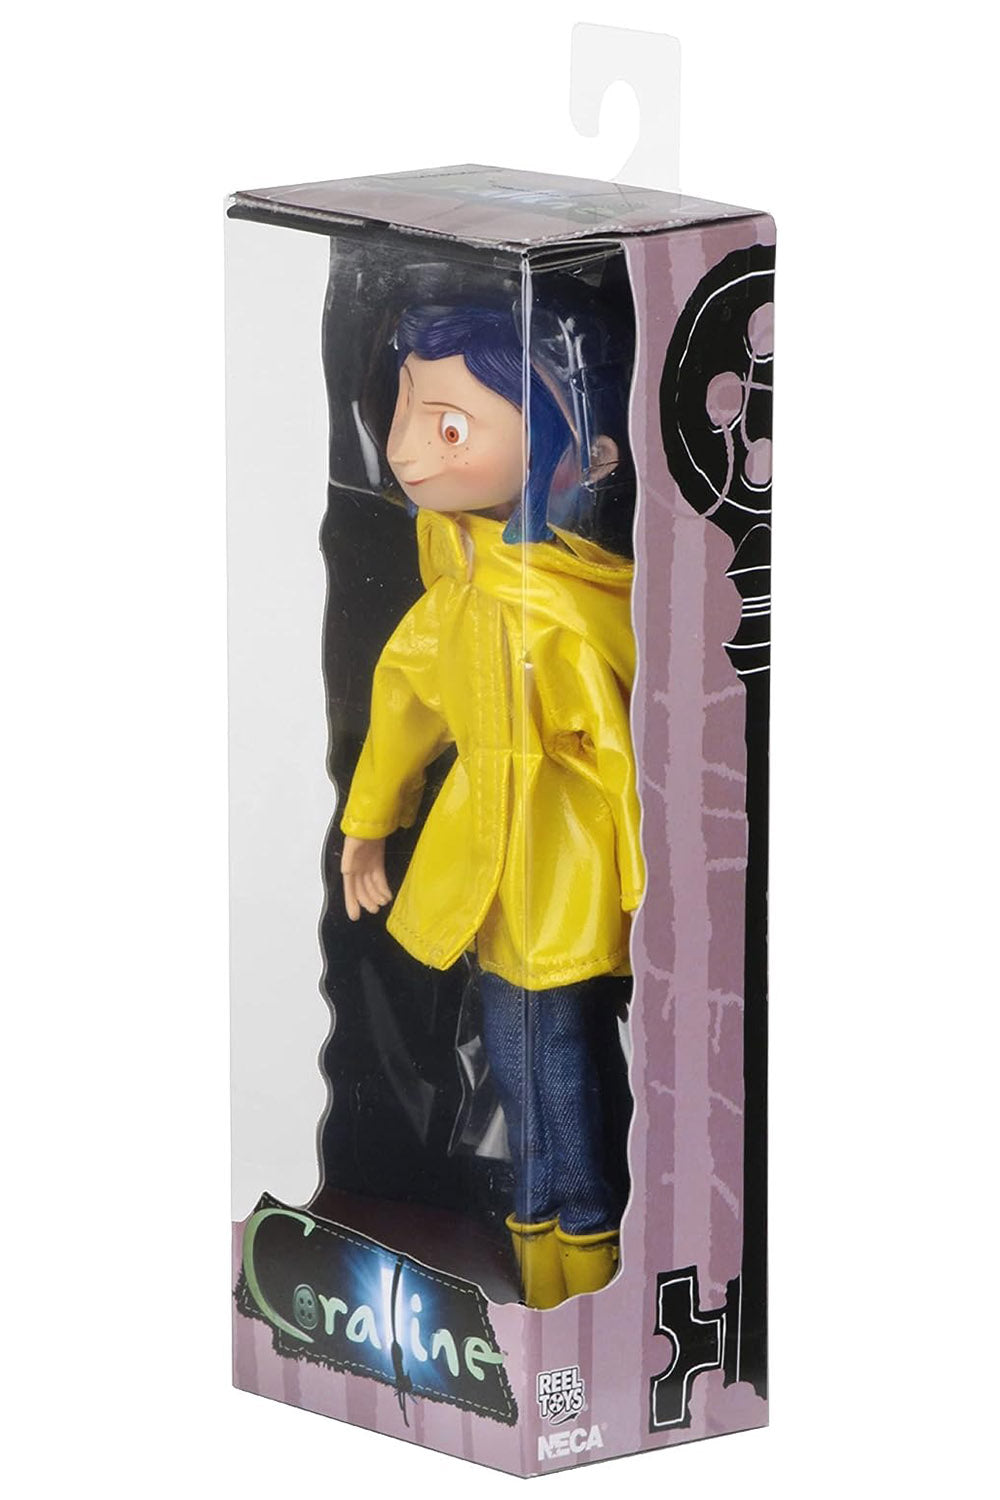 Posable Coraline Doll